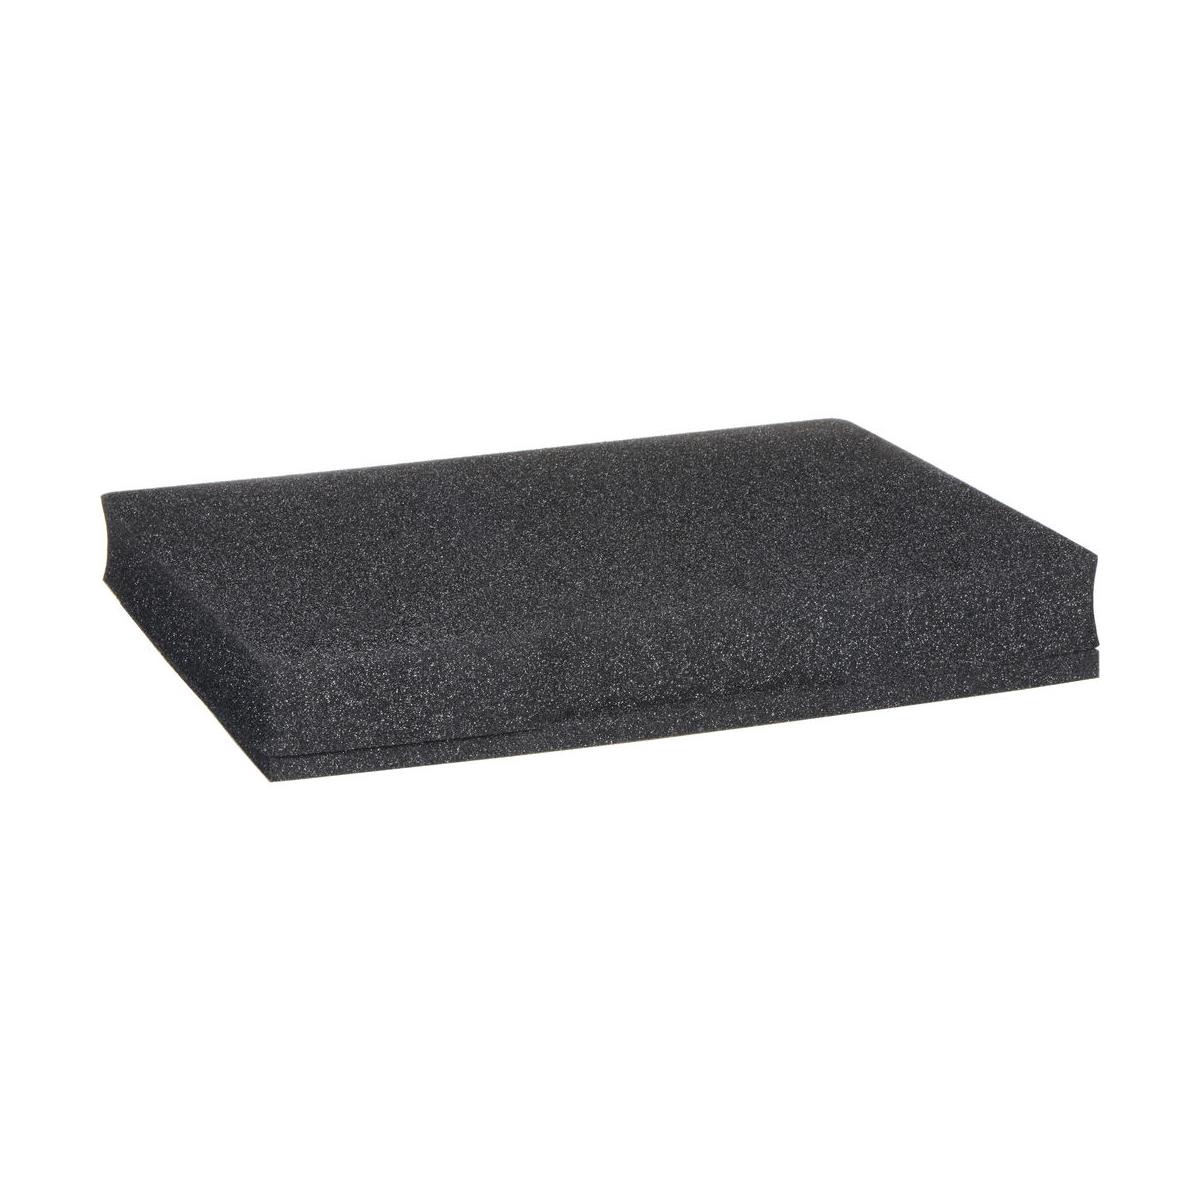 Pelican 1495 High Density Foam Set for 1495CC1 and 1495CC2 Cases, 2 Piece -  1495-400-100